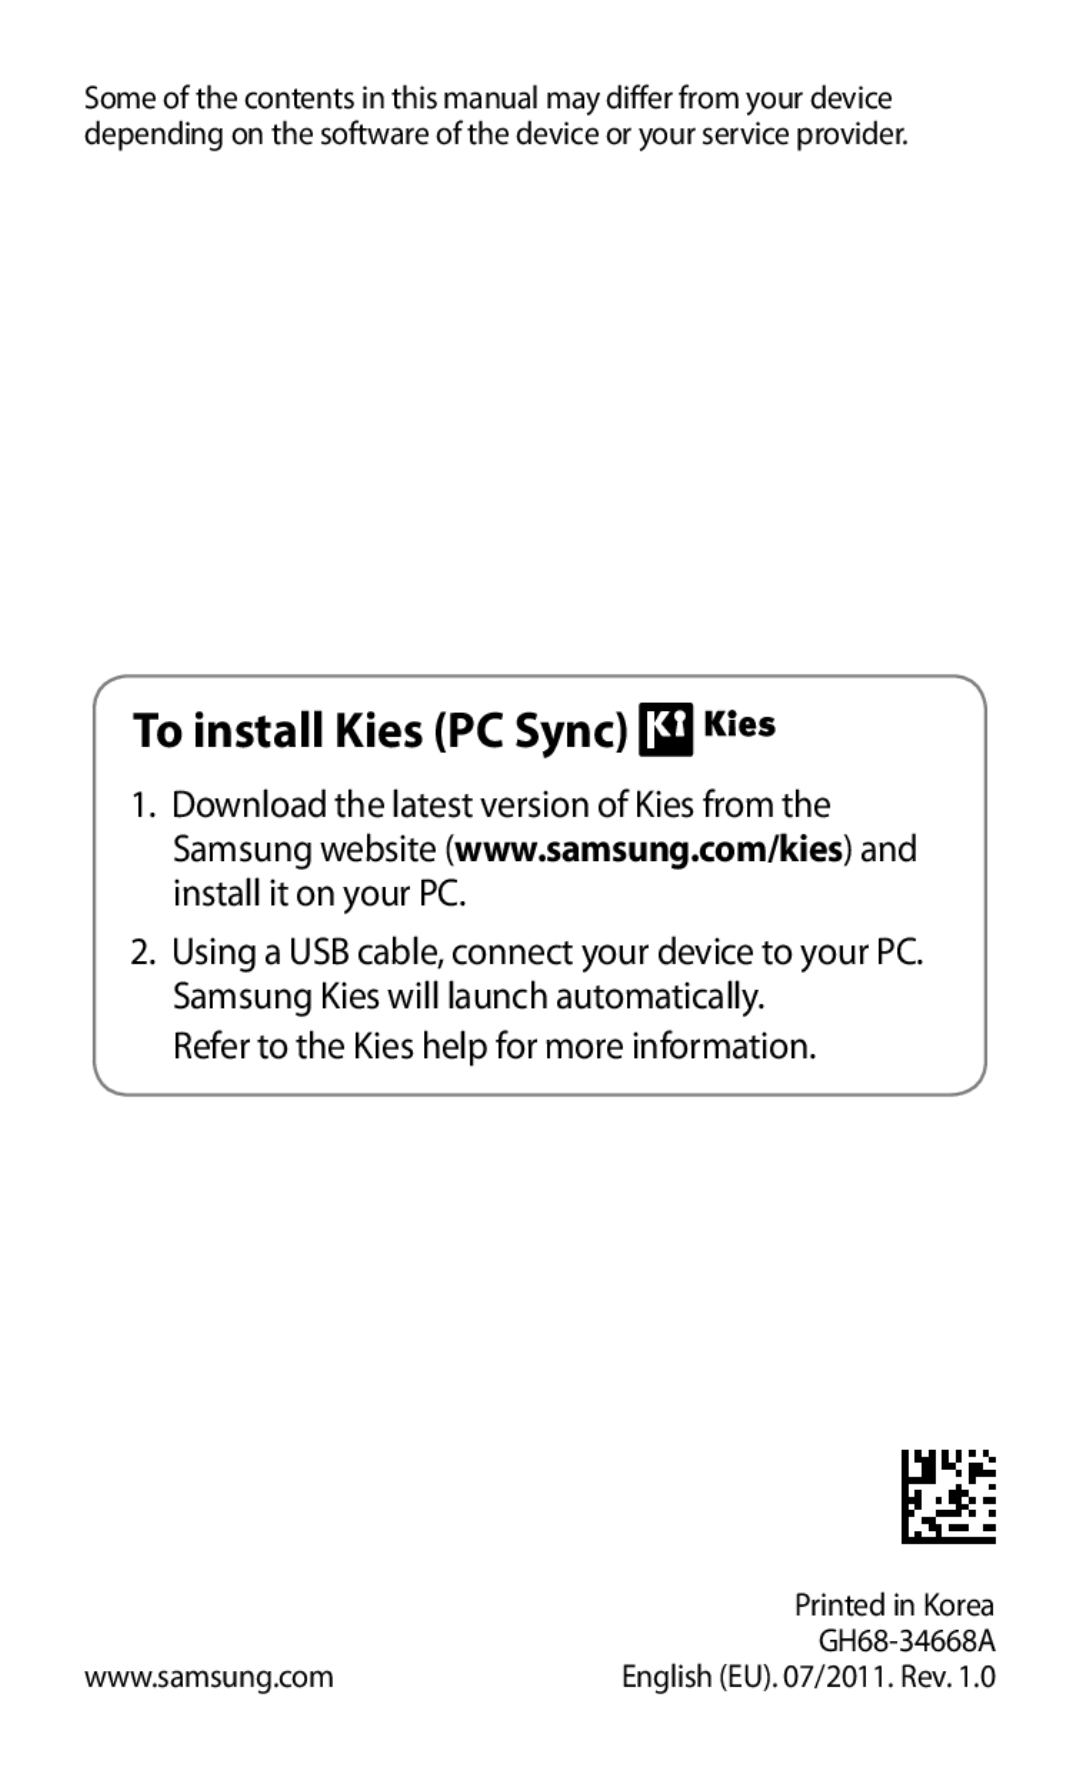 Samsung GT-P7300FKEJED, GT-P7300FKAARB manual To install Kies PC Sync, Refer to the Kies help for more information 